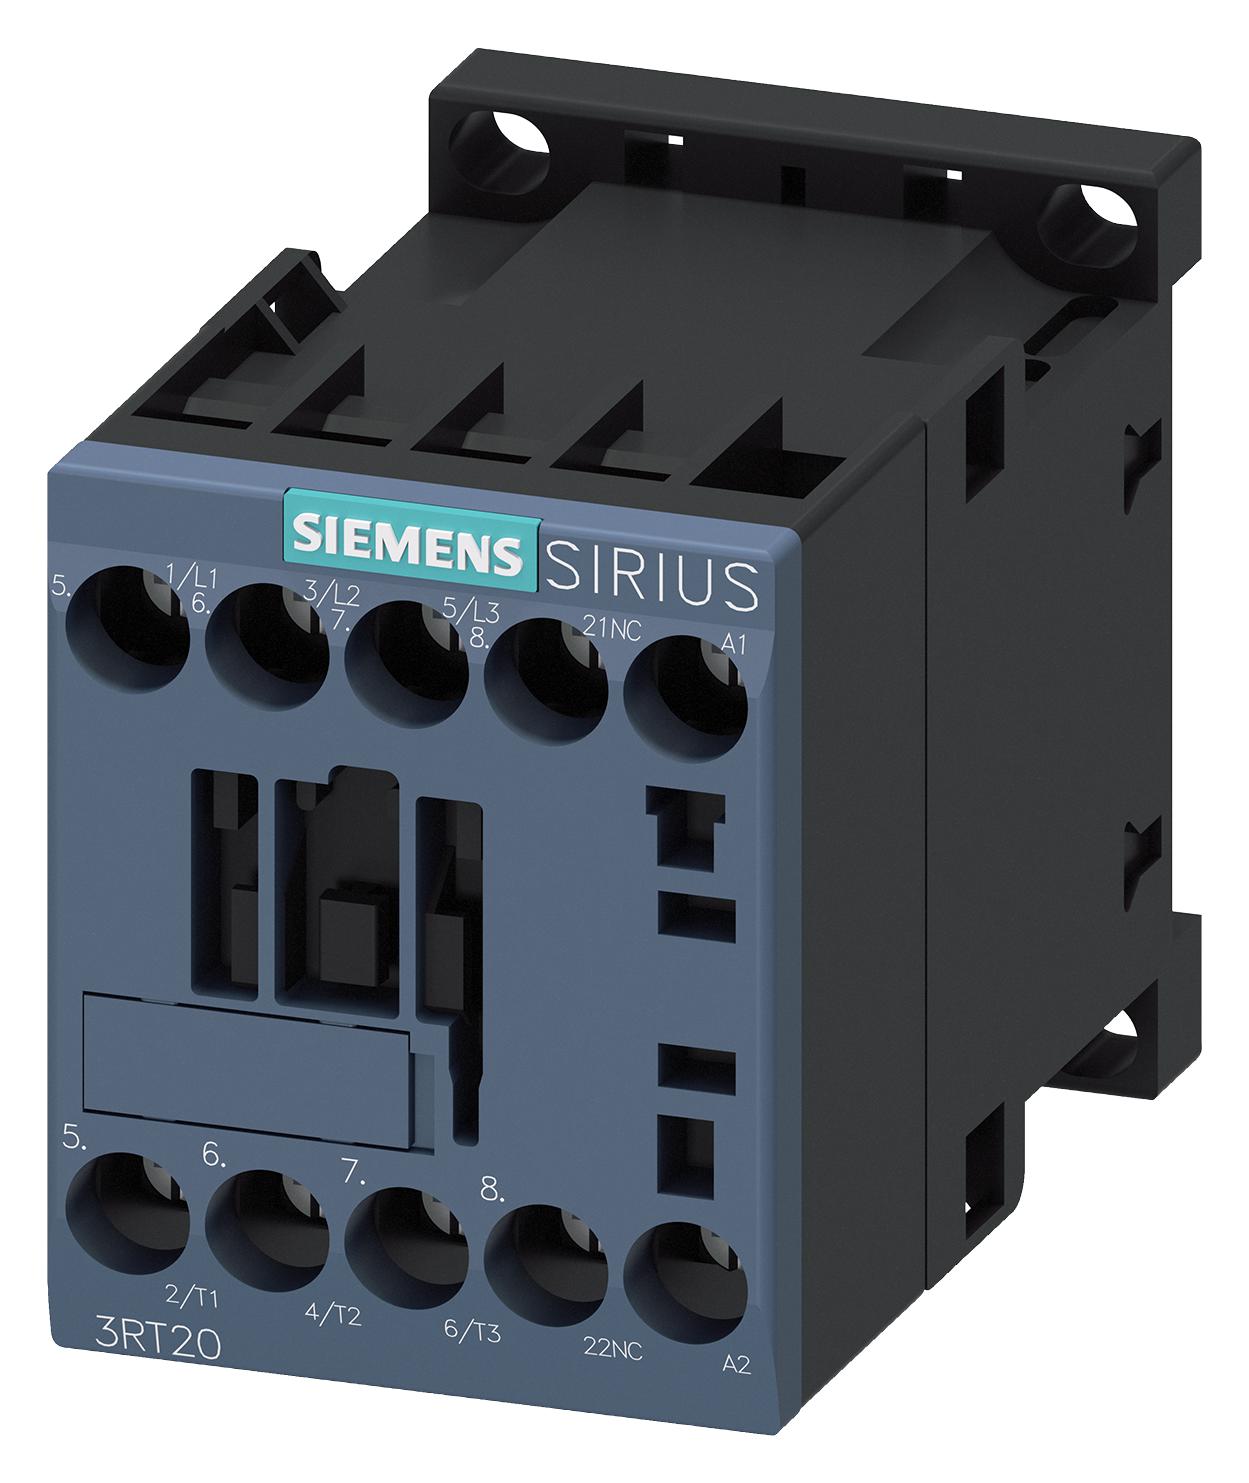 3RT2016-1AP02 CONTACTOR, 3PST-NO, 230V, PANEL/DINRAIL SIEMENS